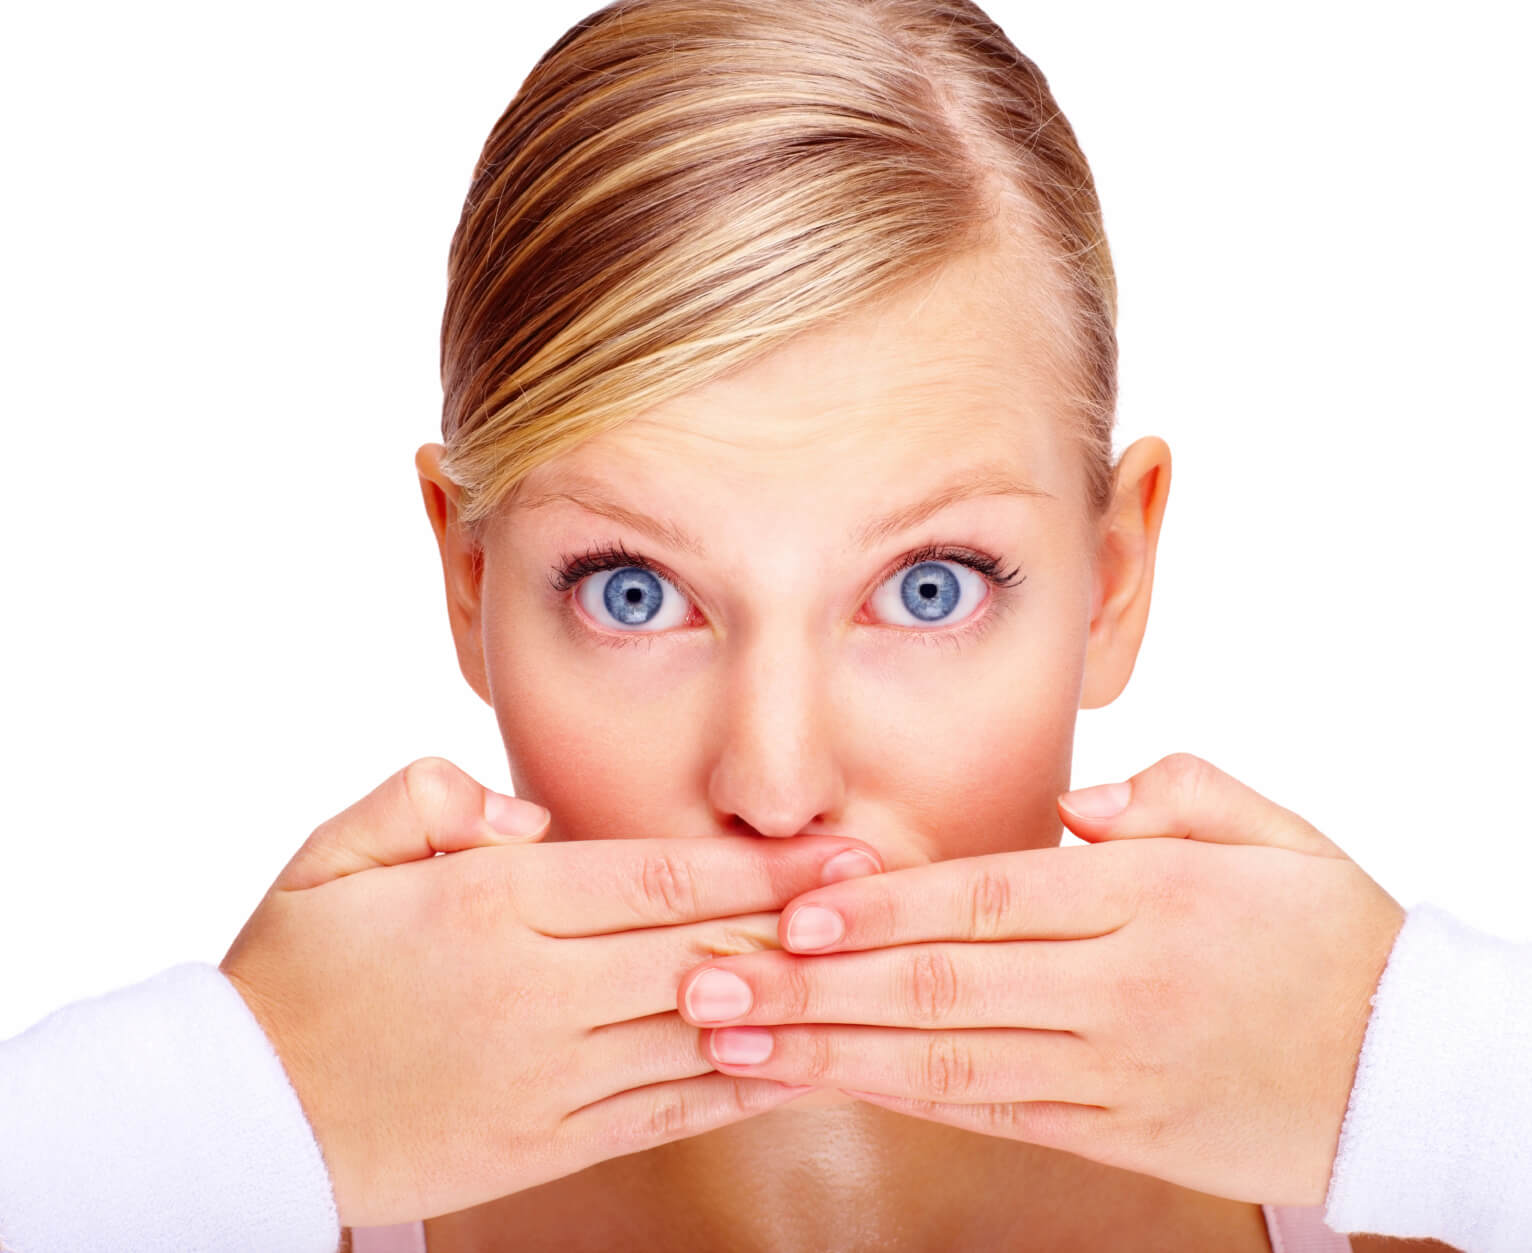 Blond woman covering her mouth with both hands